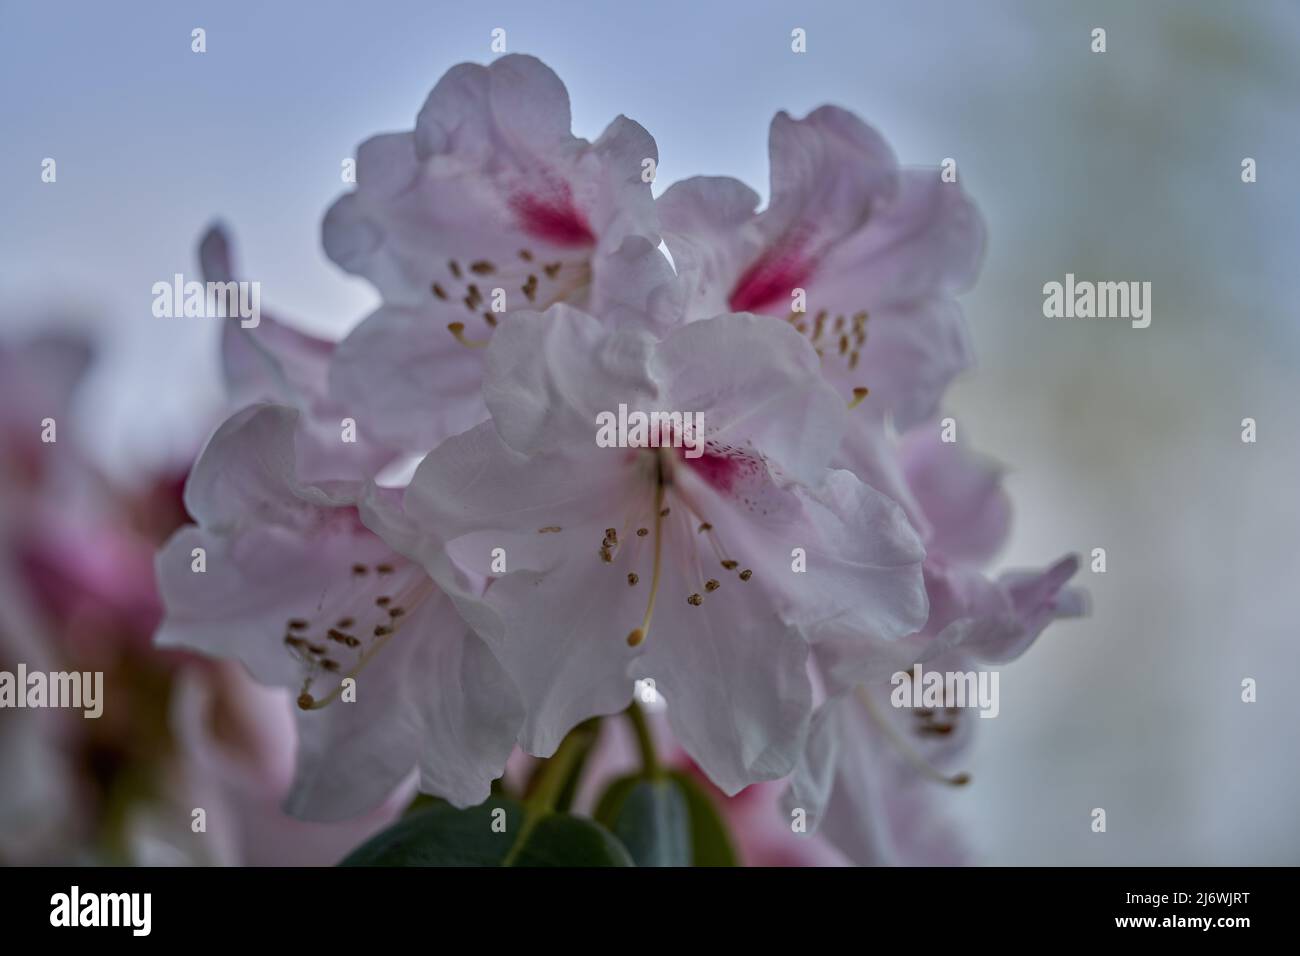 Lush,colorful white pale pink Rhododendron  chionoides blossom flowers close up Stock Photo